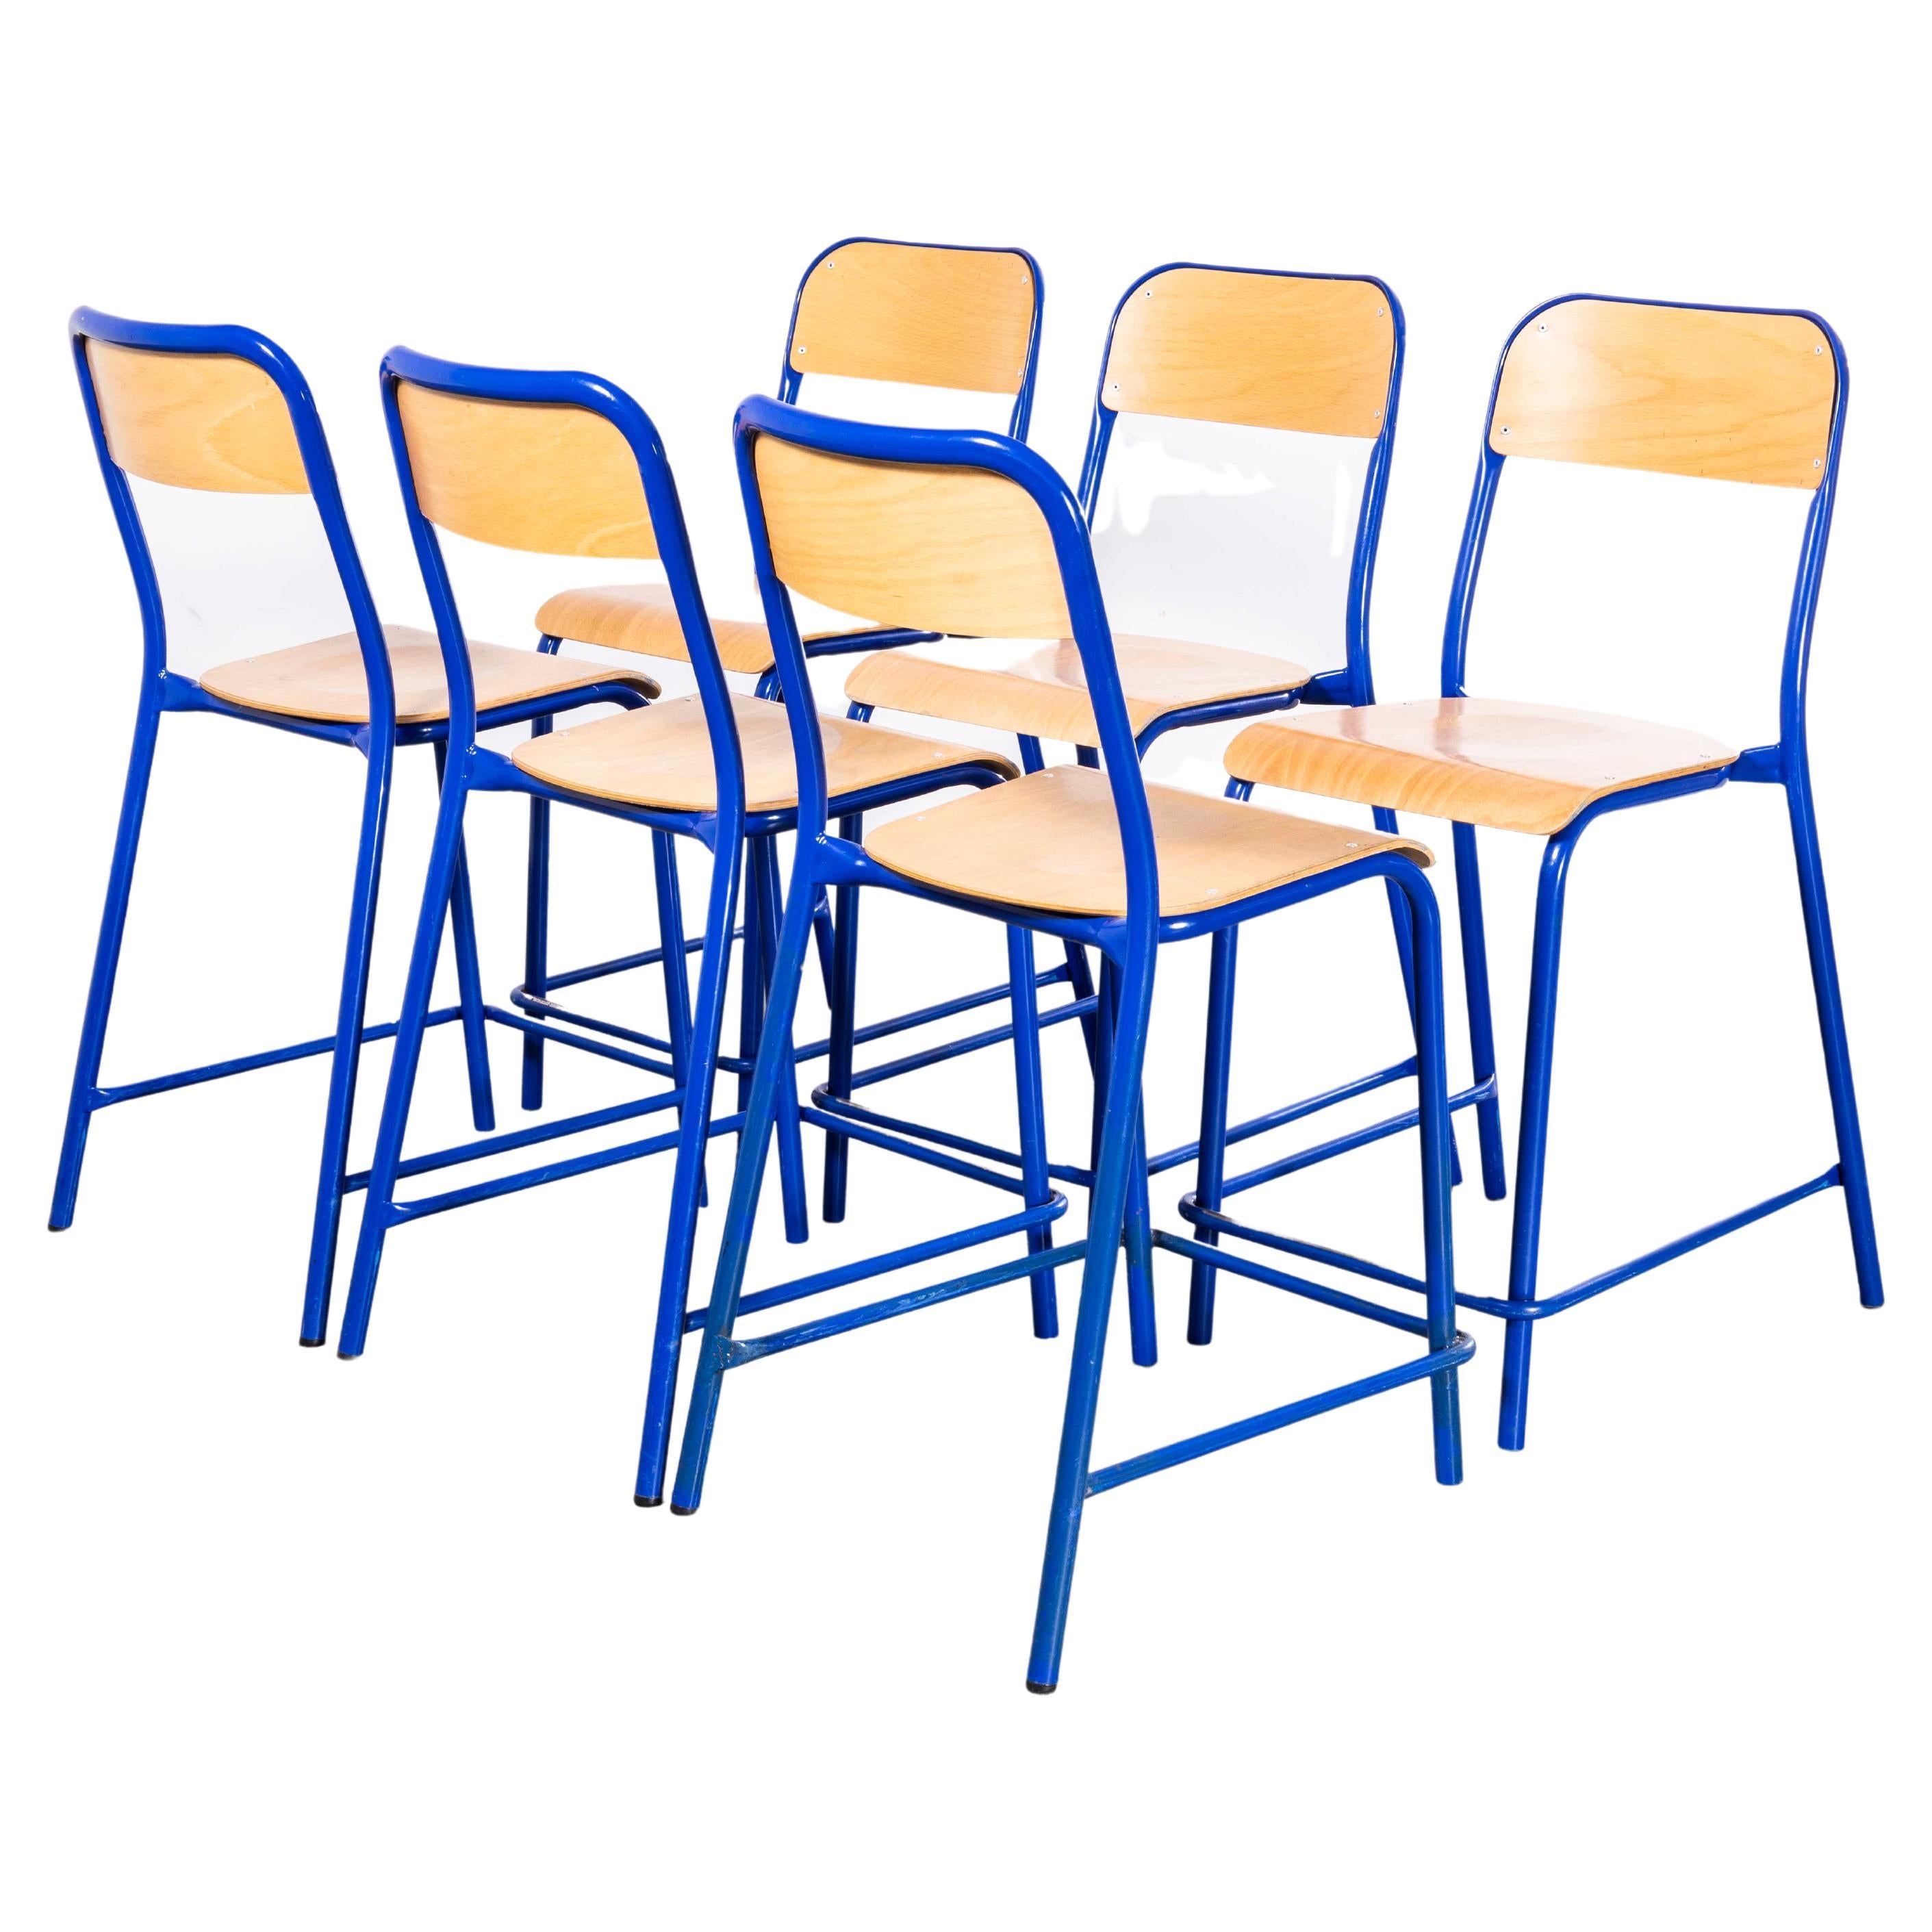 1970's French Mullca Stacking D Back High Bar Chair - Blue - Set Of Six For Sale